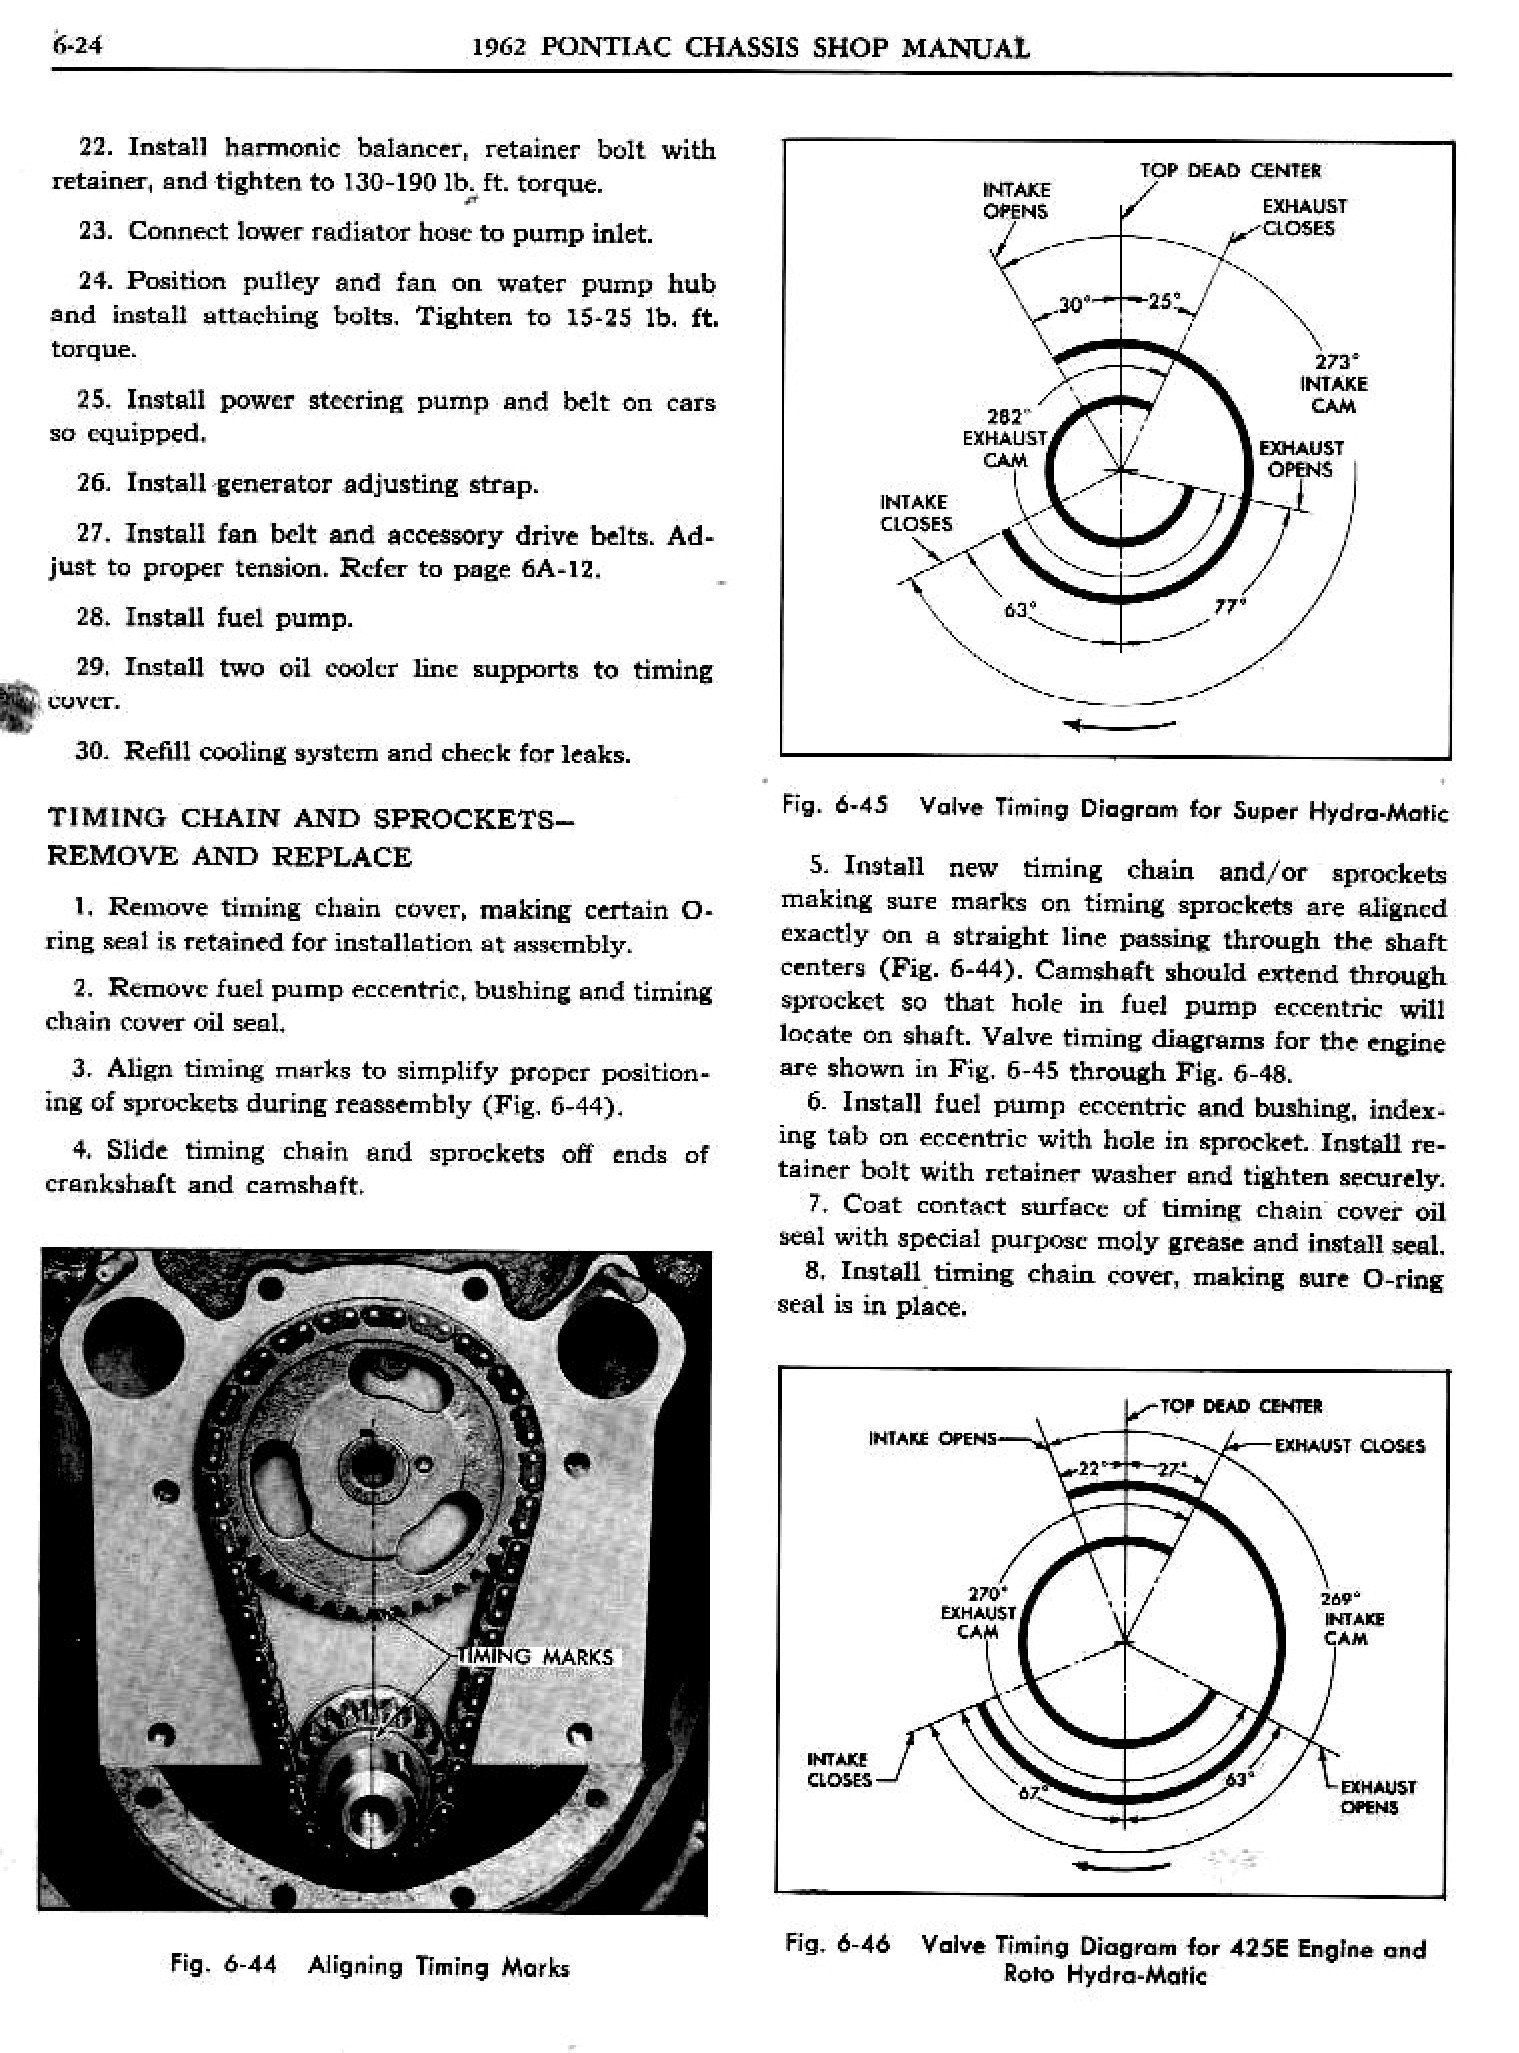 1962 Pontiac Chassis Service Manual- Engine Page 25 of 63